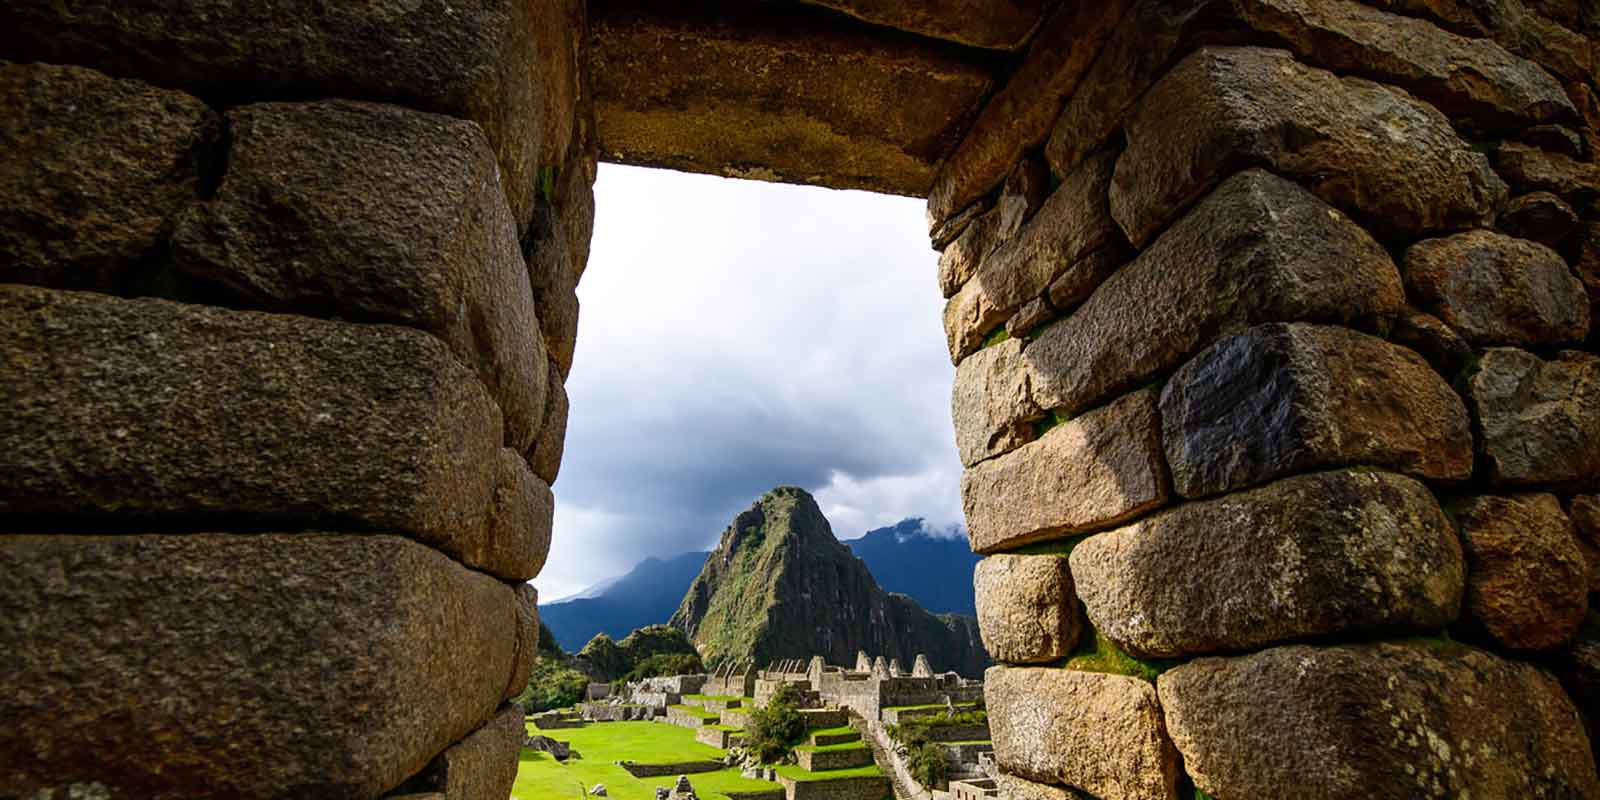 Full-day tour to Machu Picchu on the Observatory train